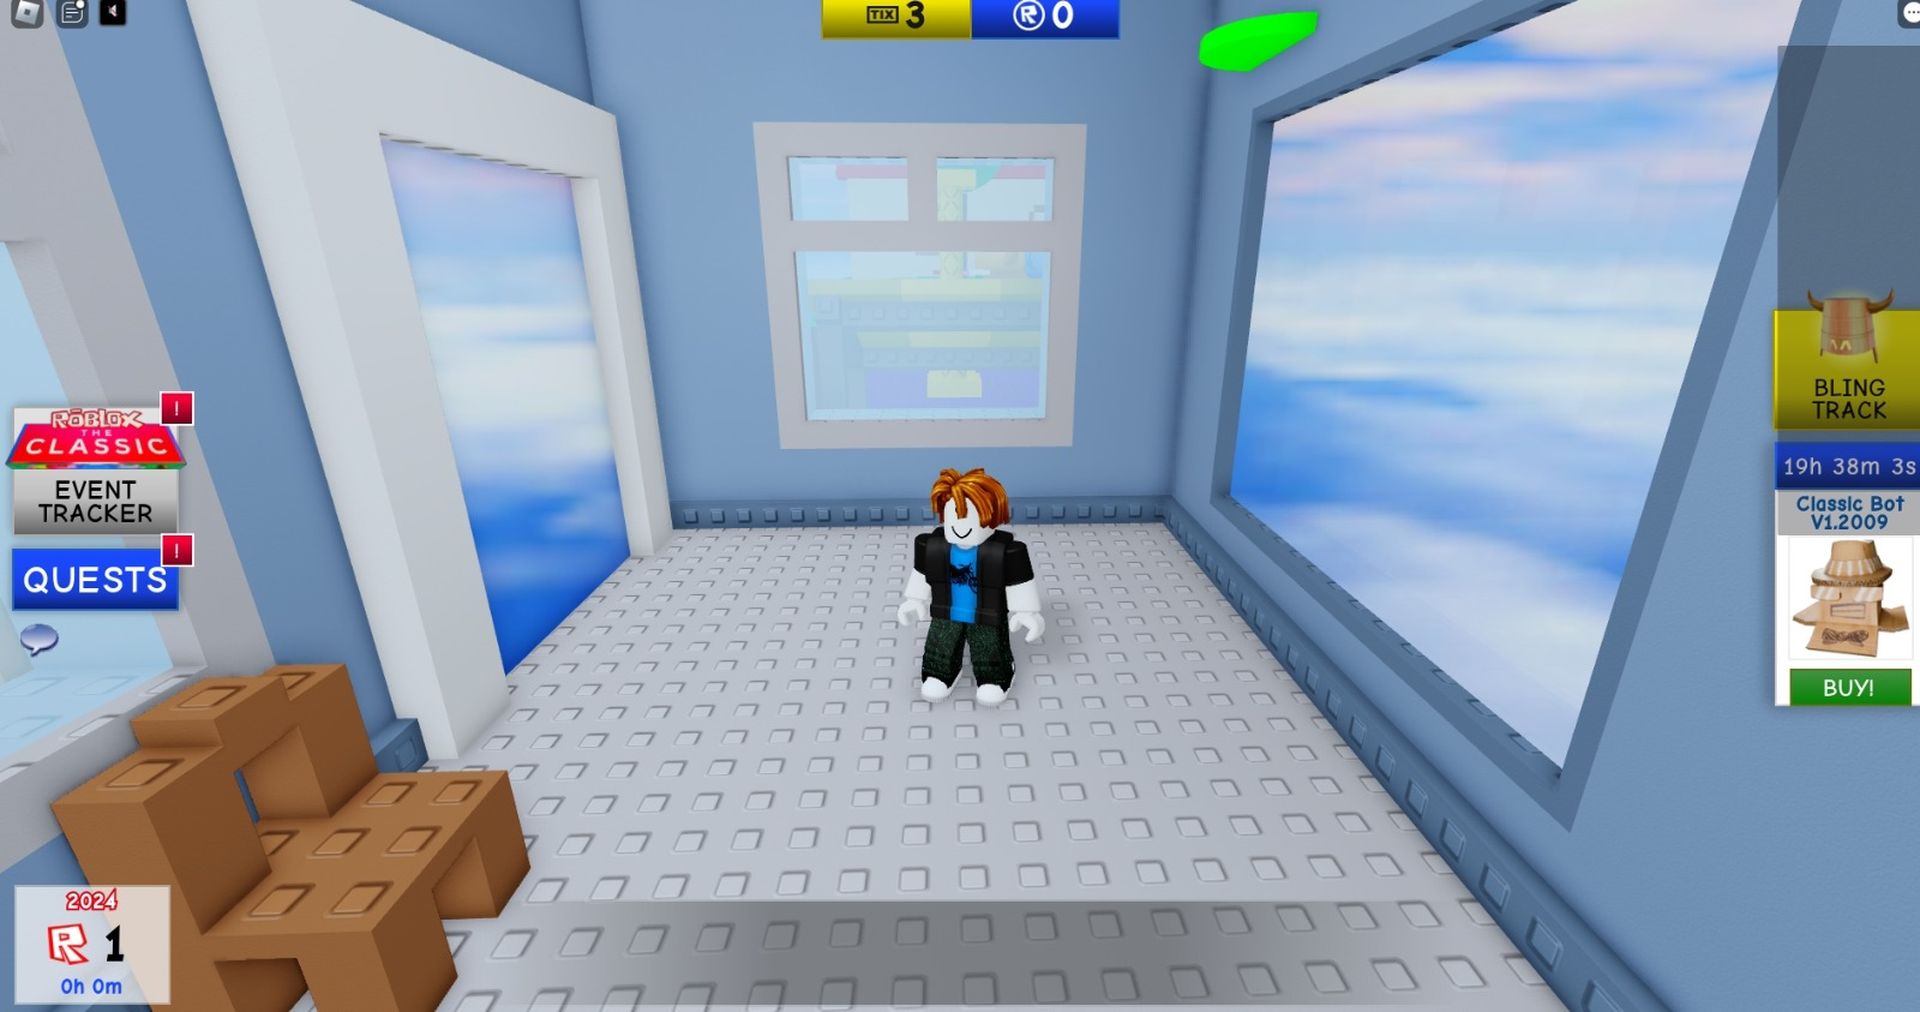 How to complete the Mirror Secret Roblox Classic quest